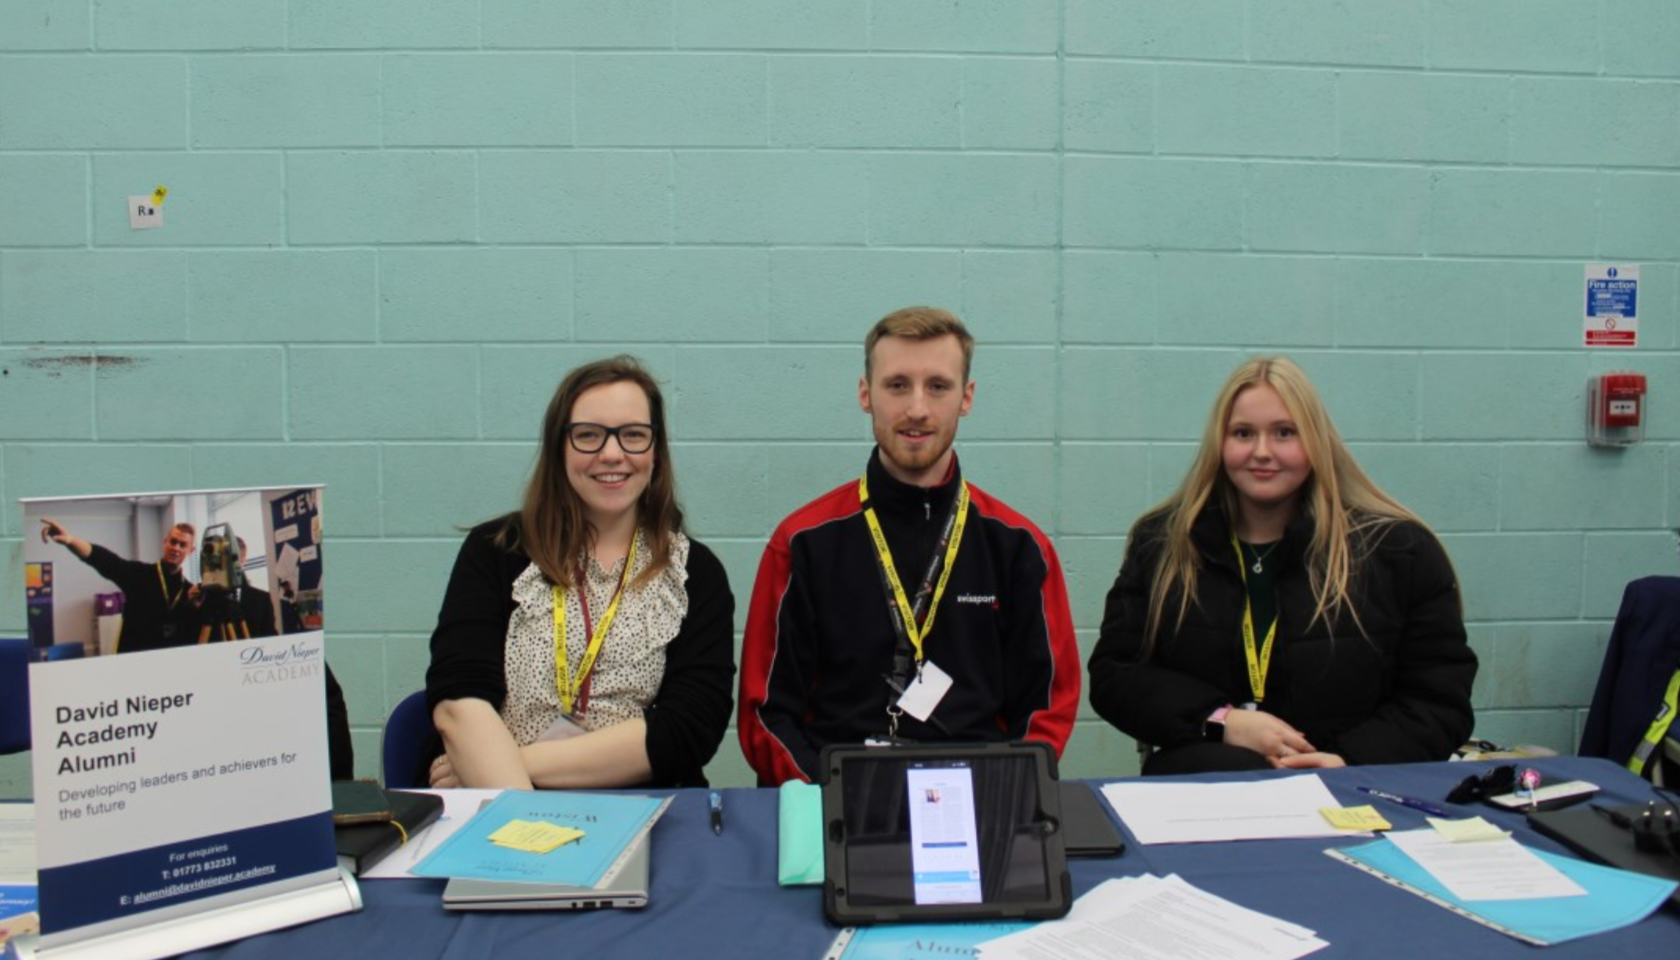 Students gain an insight into future careers